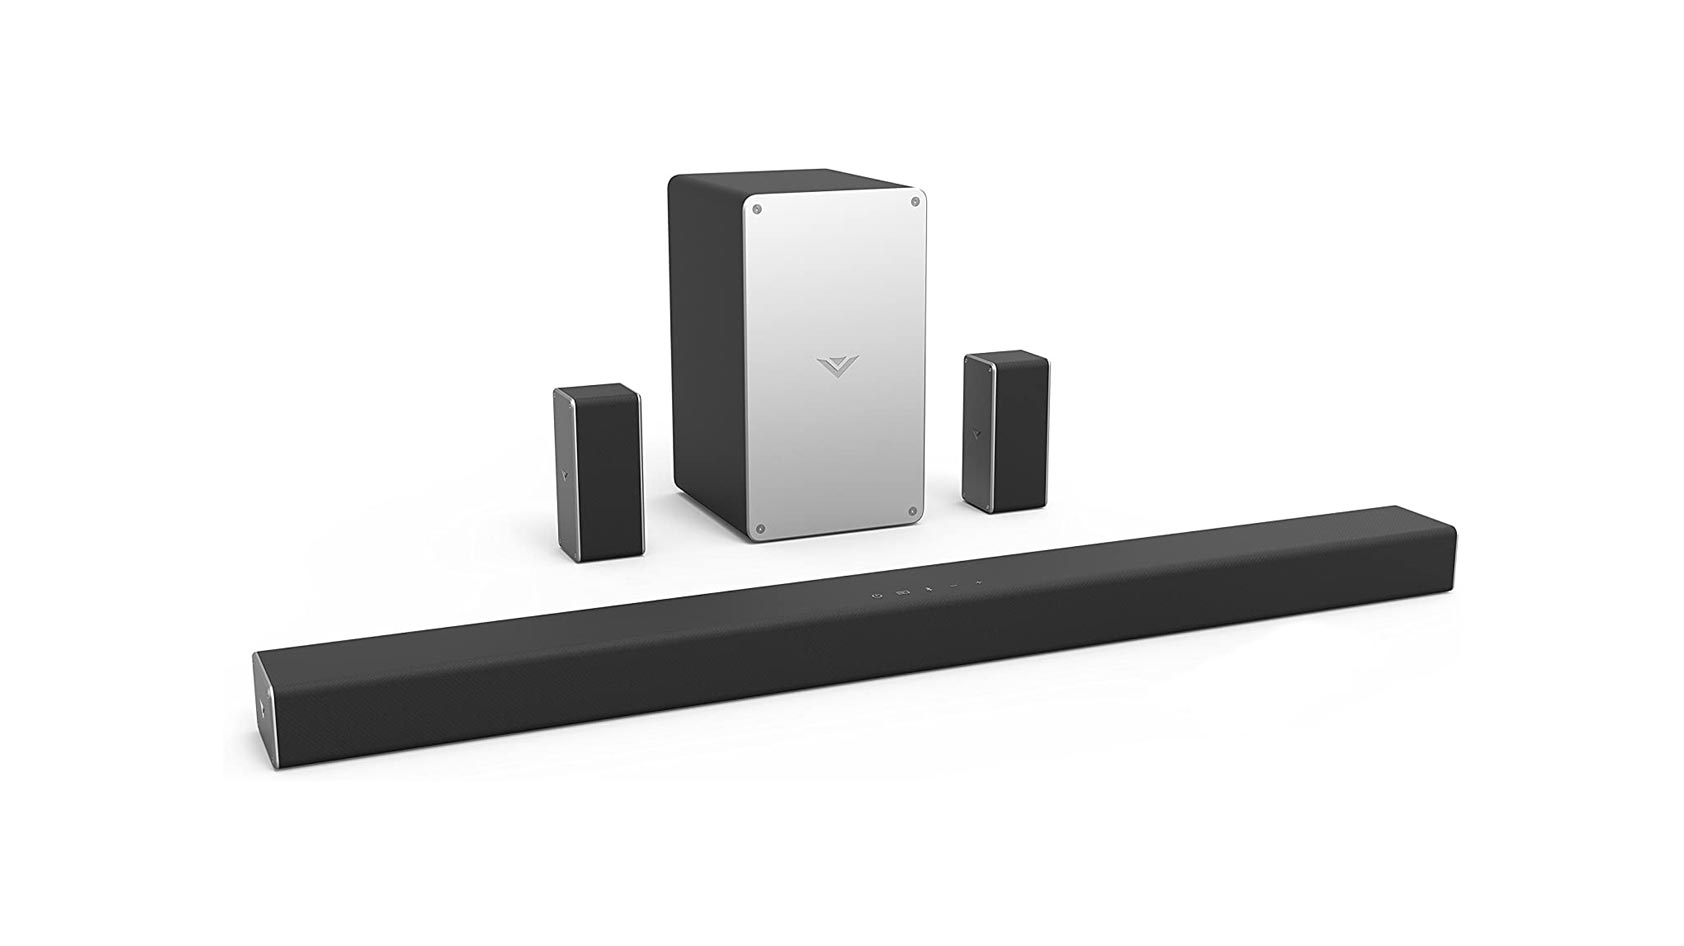 LG SK10Y Soundbar review: Hearing is believing - SoundGuys